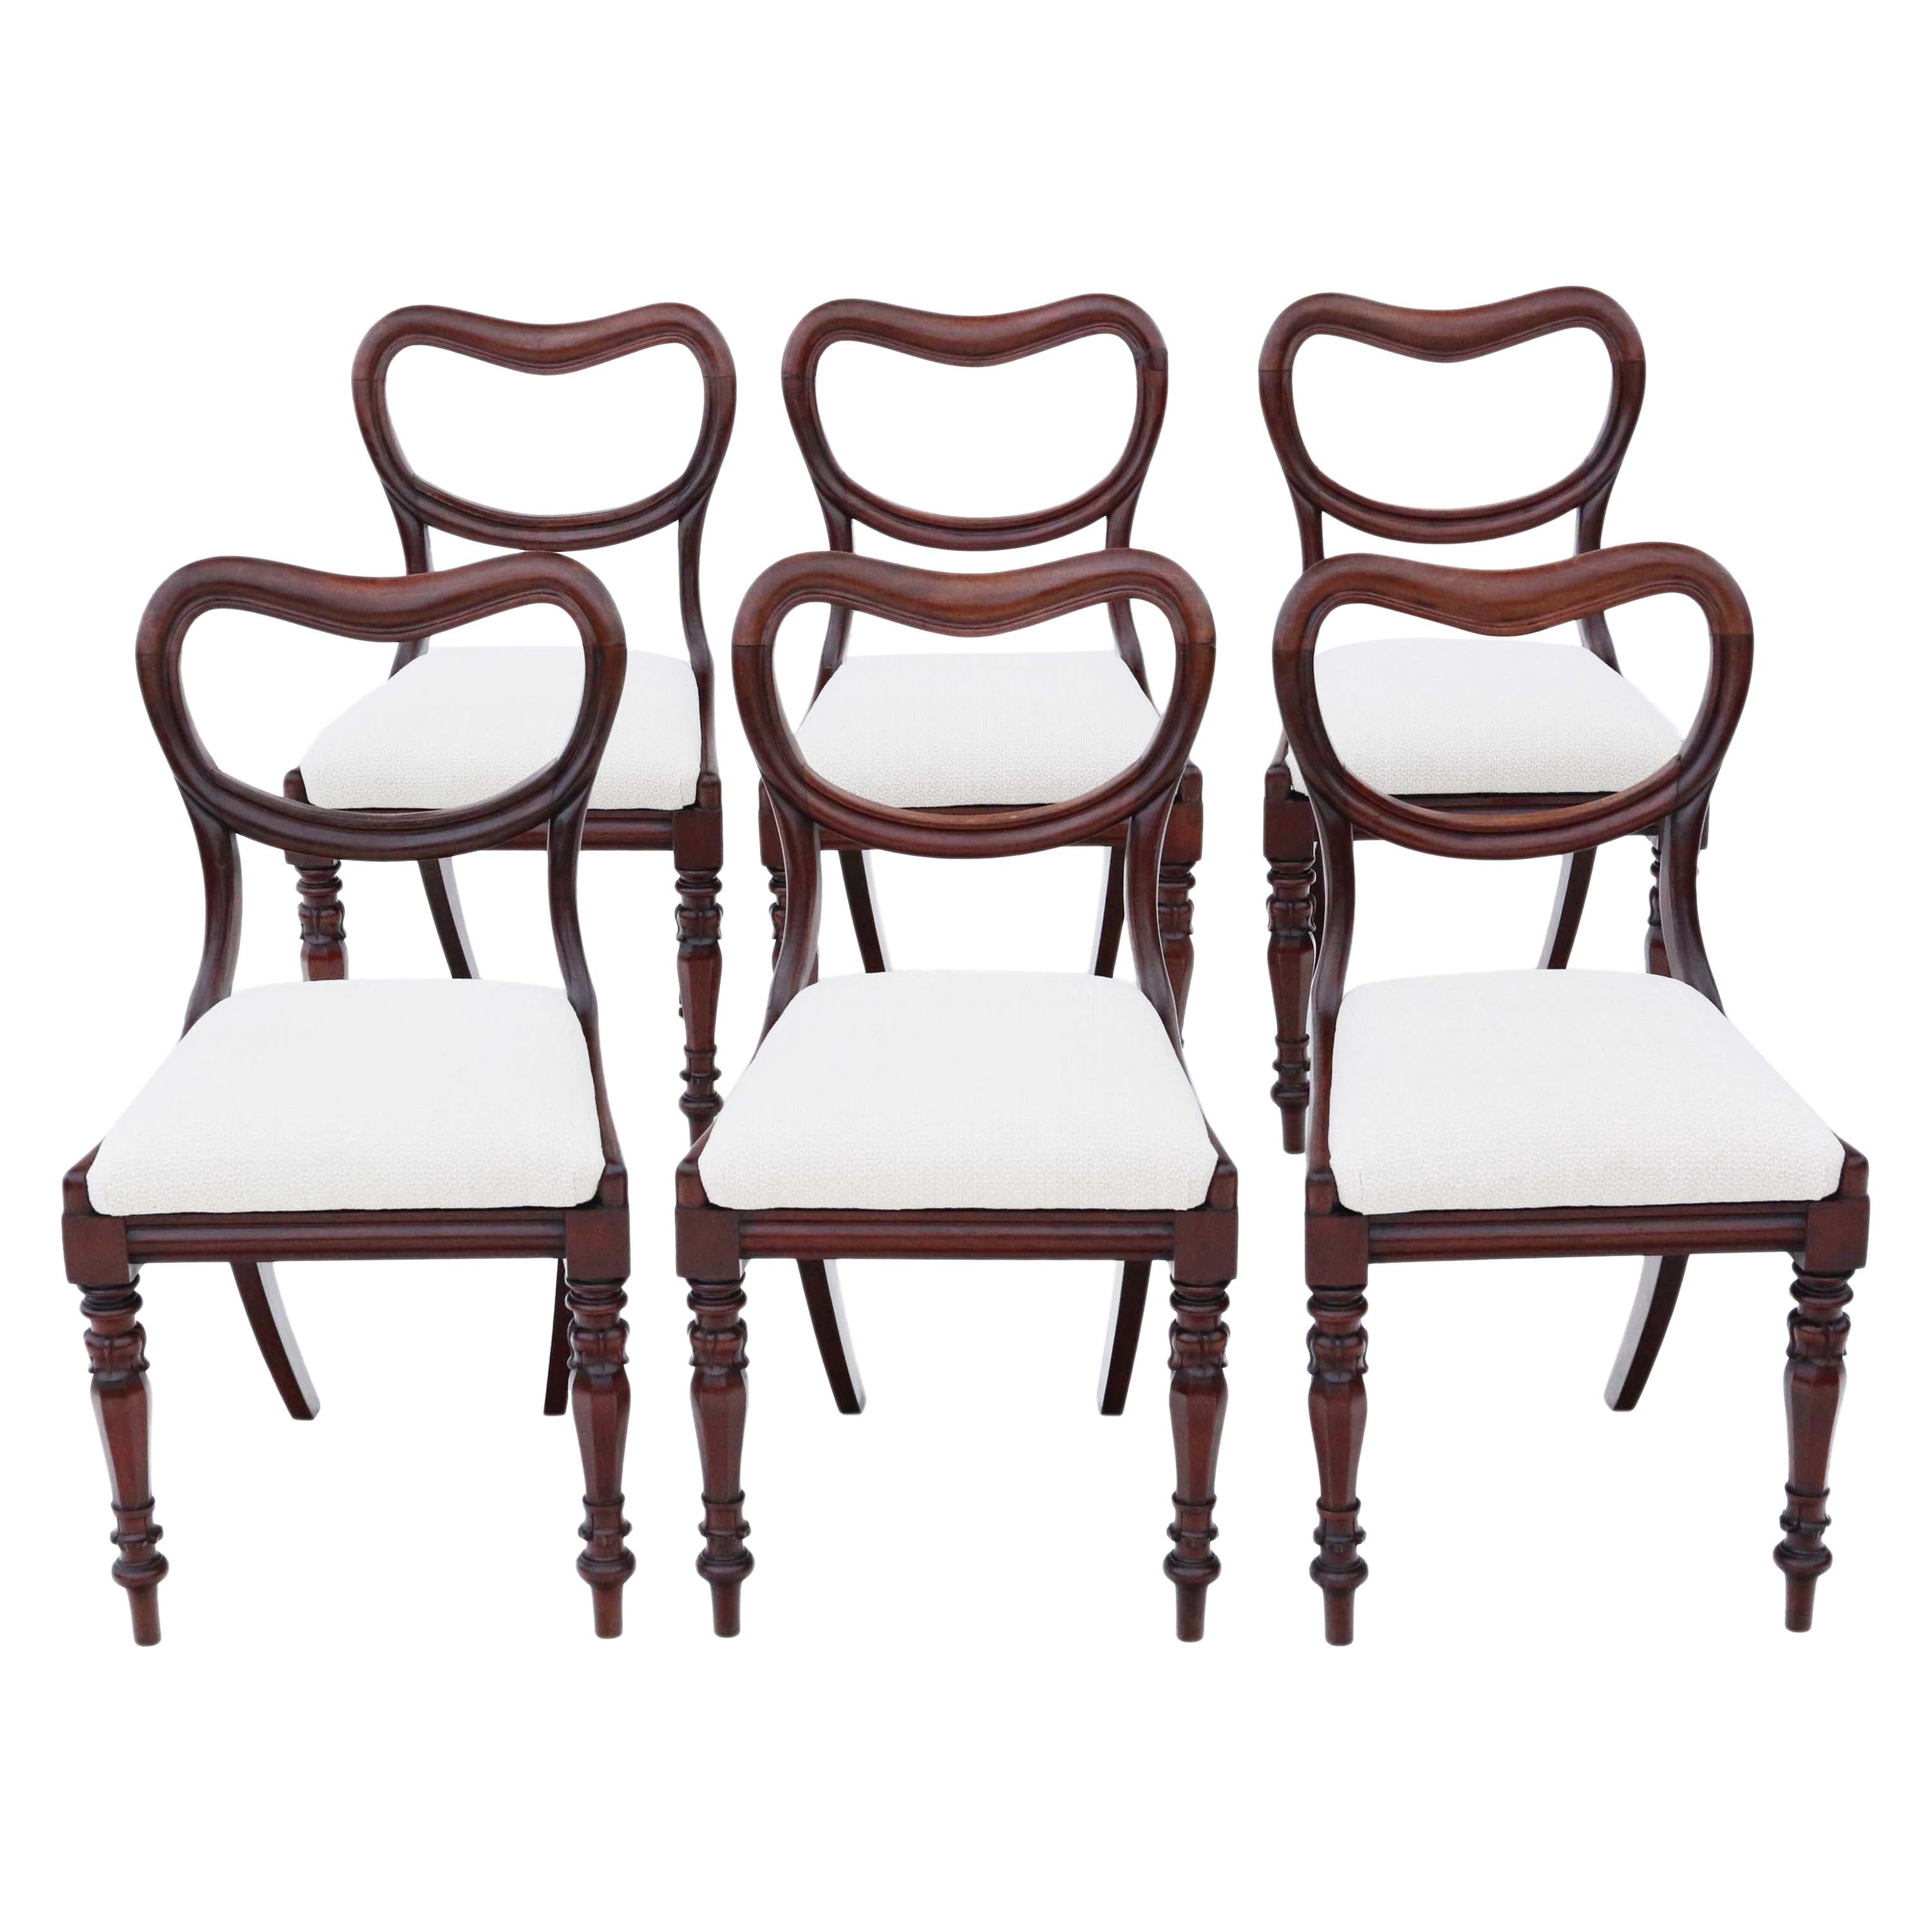 Antique Set of 6 William IV Mahogany Balloon Back Dining Chairs, circa 1835